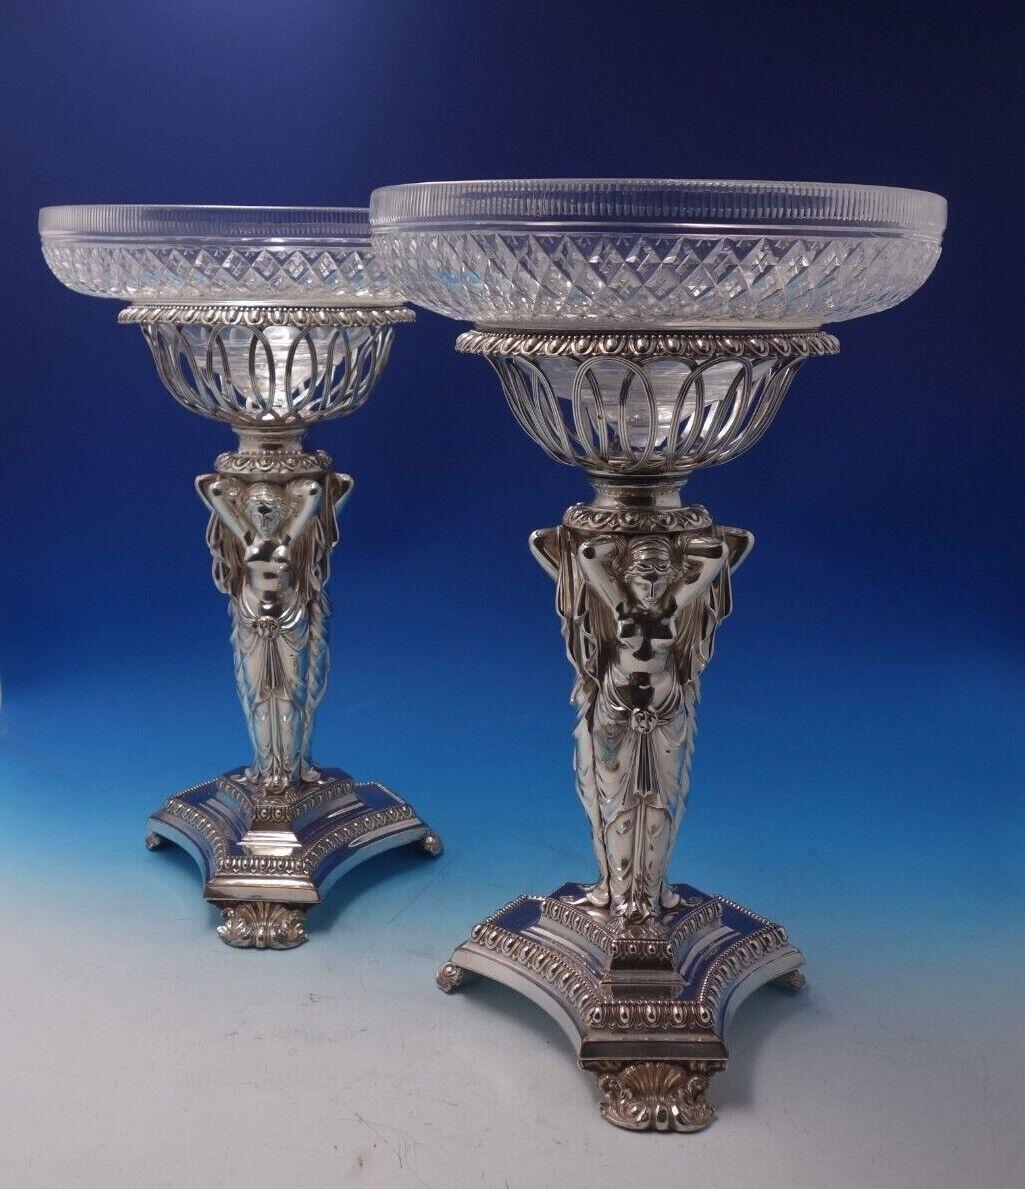 
Outstanding antique figural French silverplate pair of centerpieces with cut crystal bowls, the bases surrounded by figural Art Nouveau partially nude women, in Greek draped dress, circa 1880 (maker unknown). They each measure 15